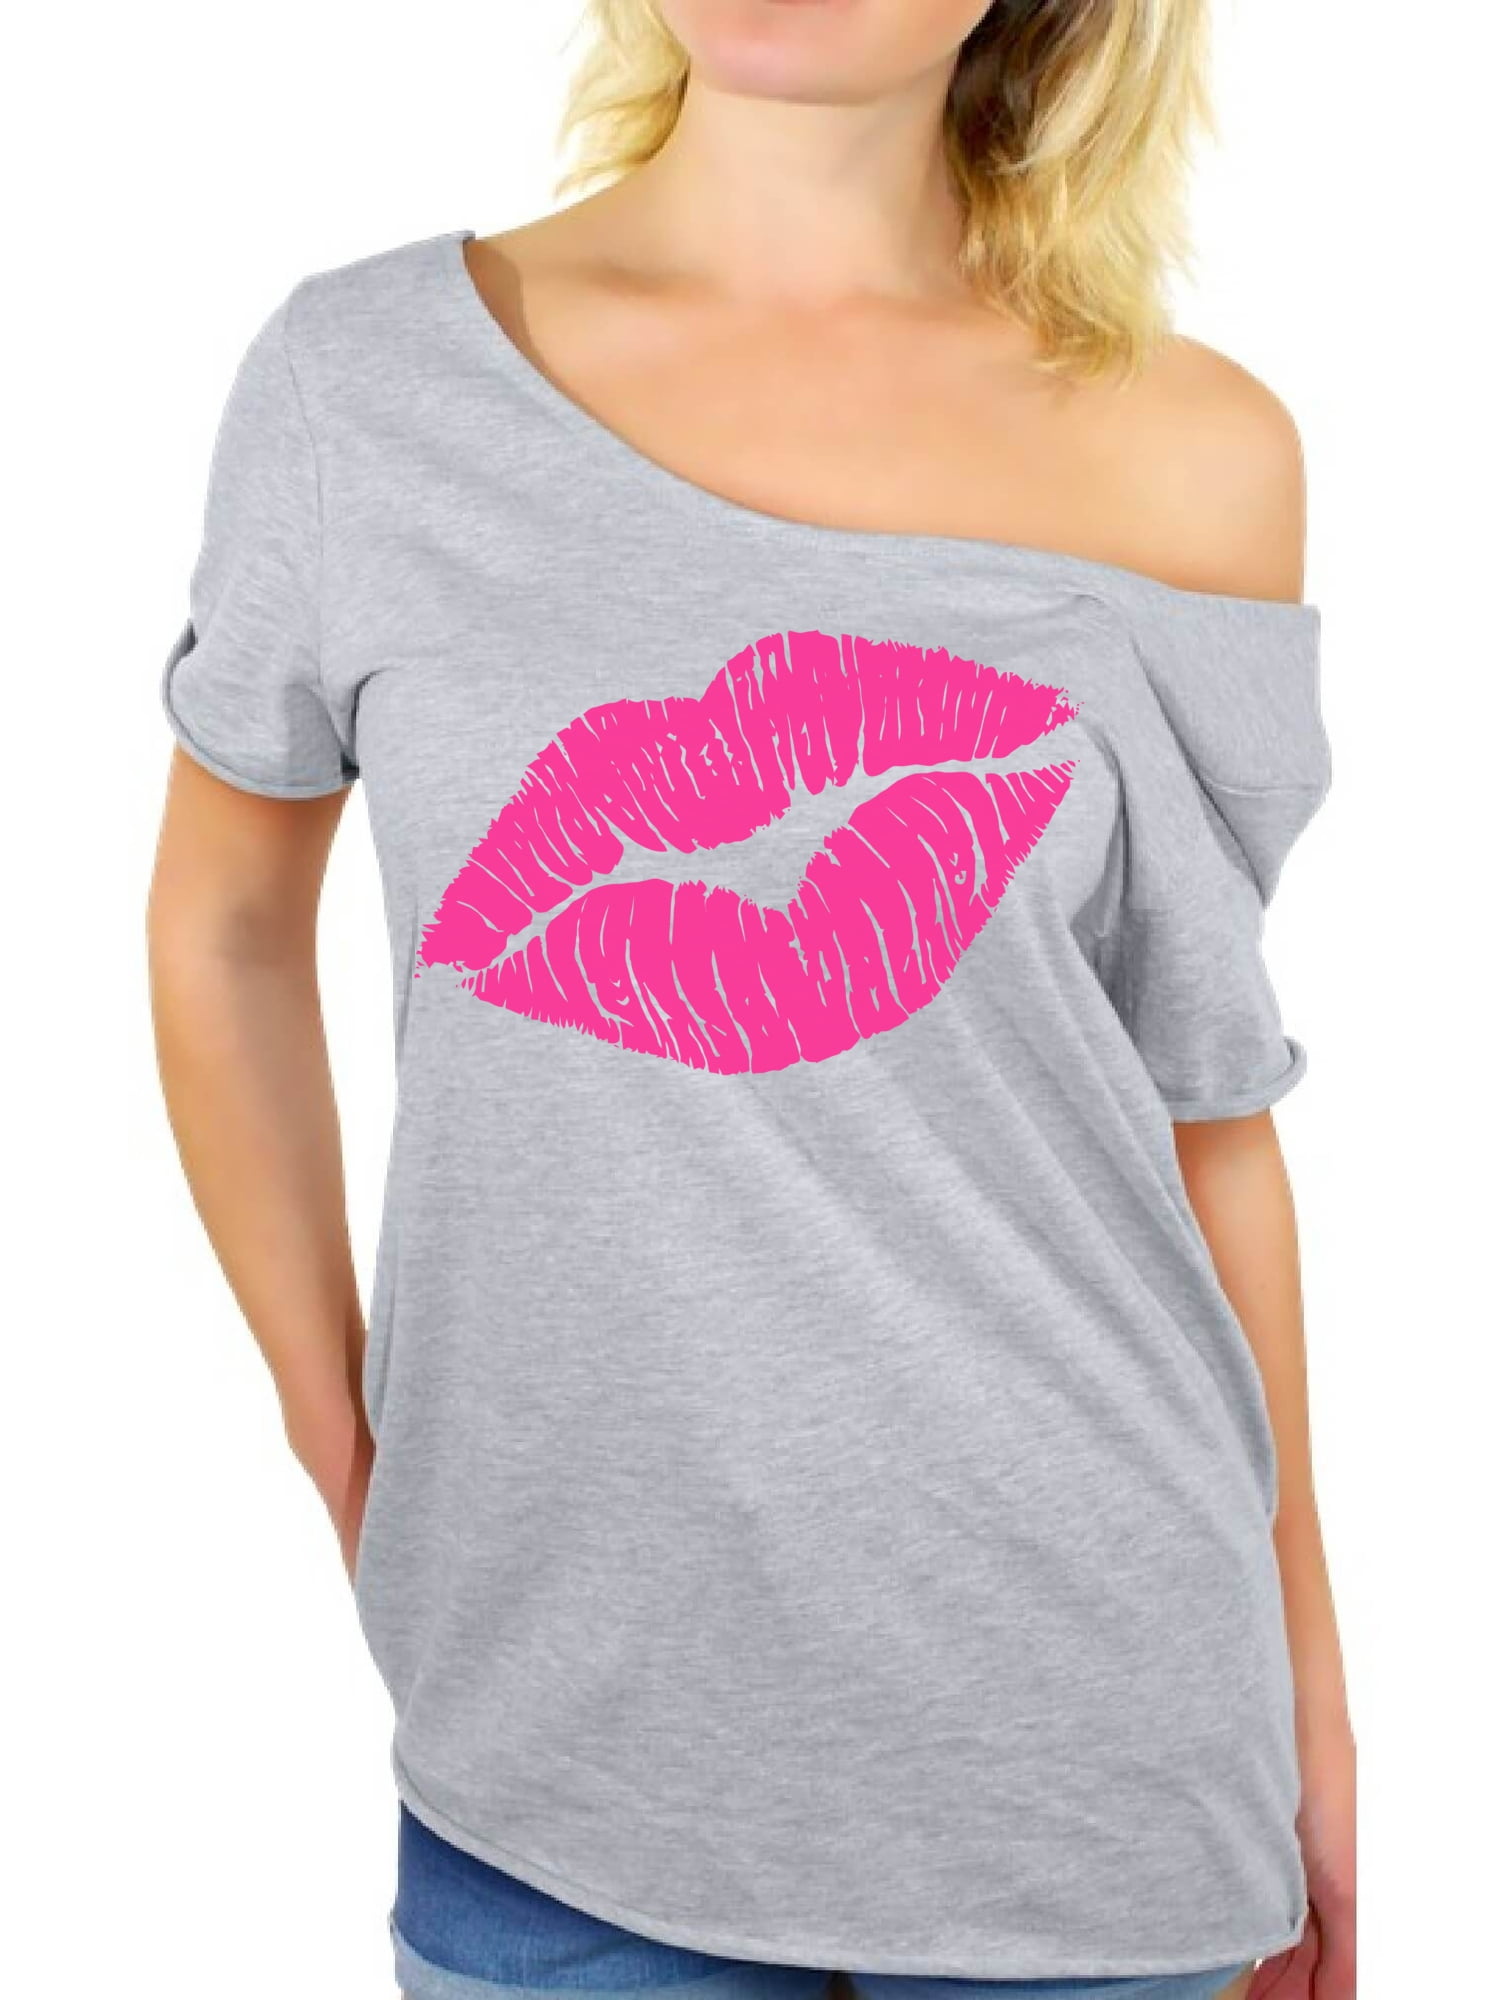 Rock T the Costume 80s Women for Accessories T Lips Shirt Off Shirt 80s 80s 80s Shoulder Shirt Awkward 80s Shirt 80s Retro Neon Shirt T Styles 80s 80s Pink Lips Clothes